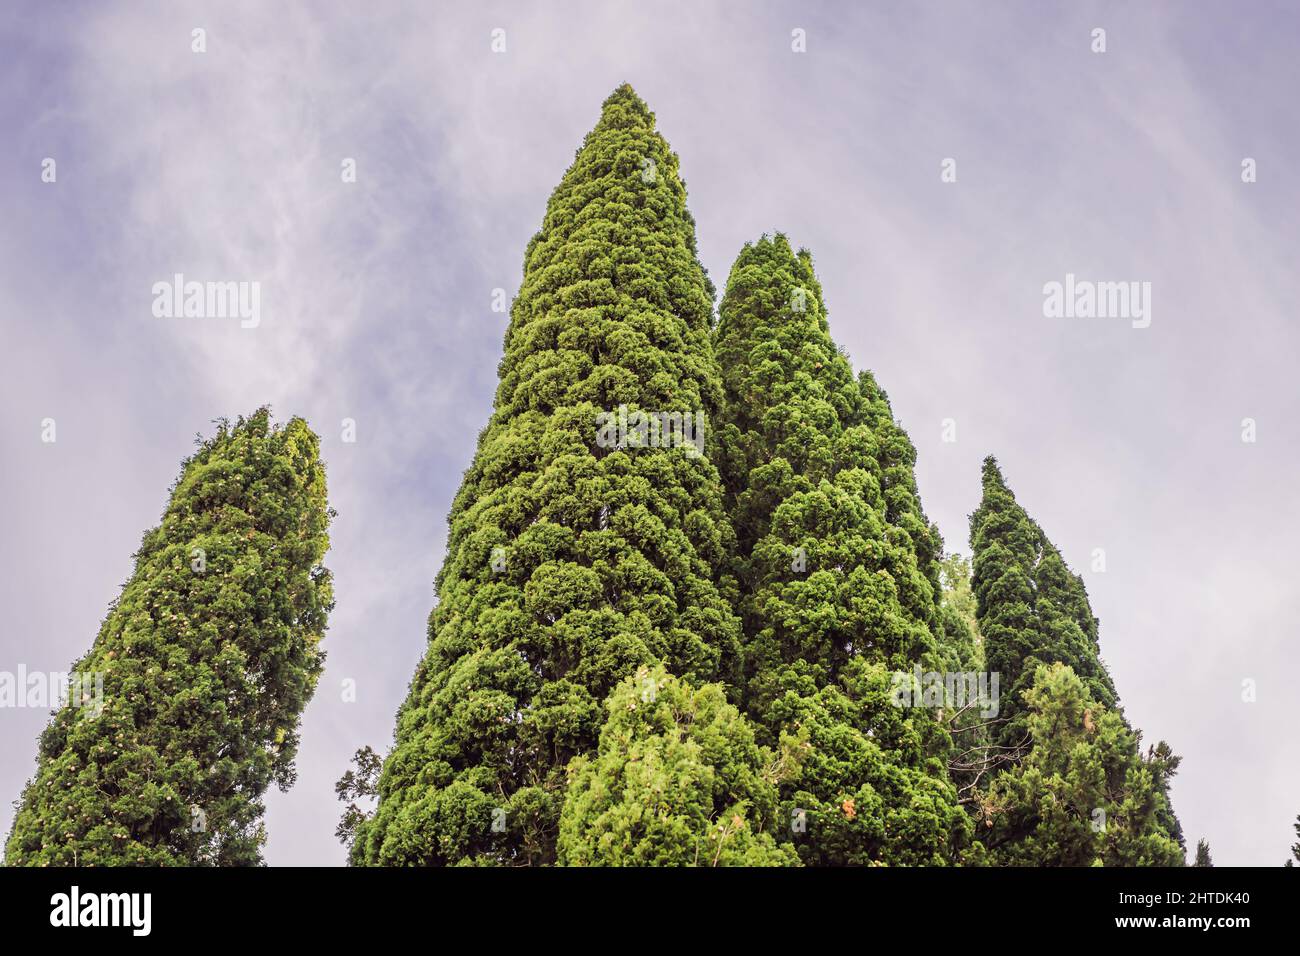 Mediterranean cypress with round brown cones seeds against the sky. Cupressus sempervirens, Italian cypress or pencil pine Stock Photo